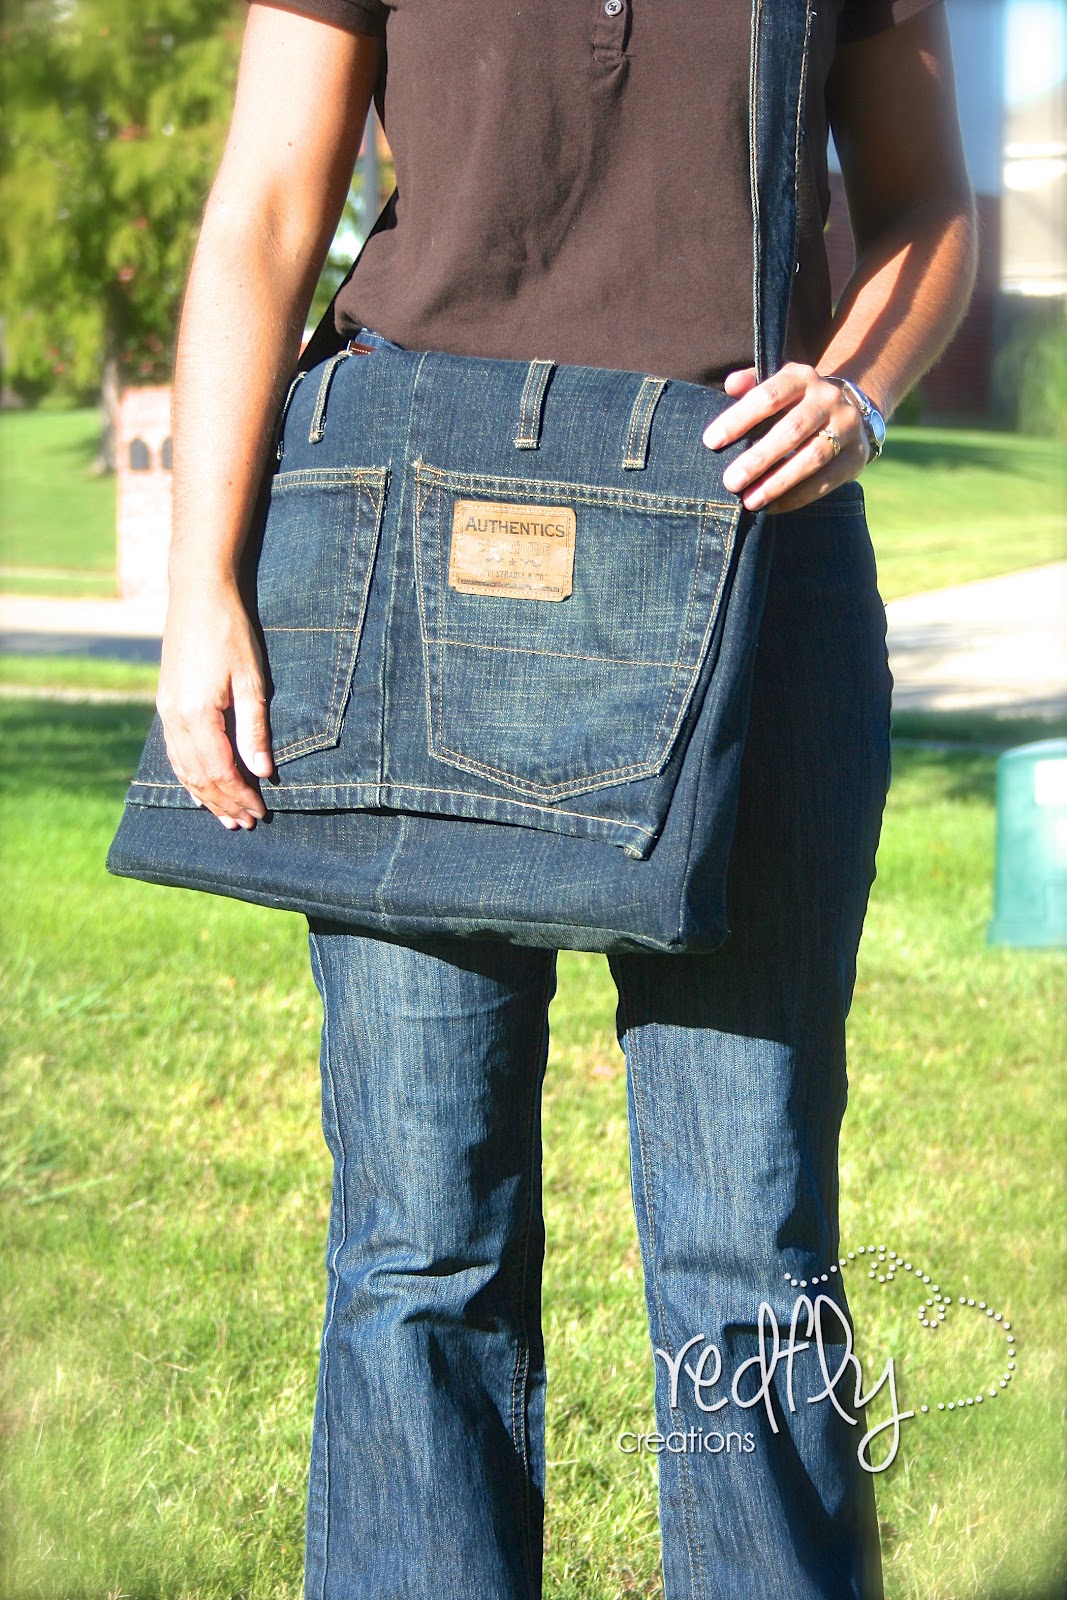 Redfly Creations: Messenger Bag from a Pair of Jeans